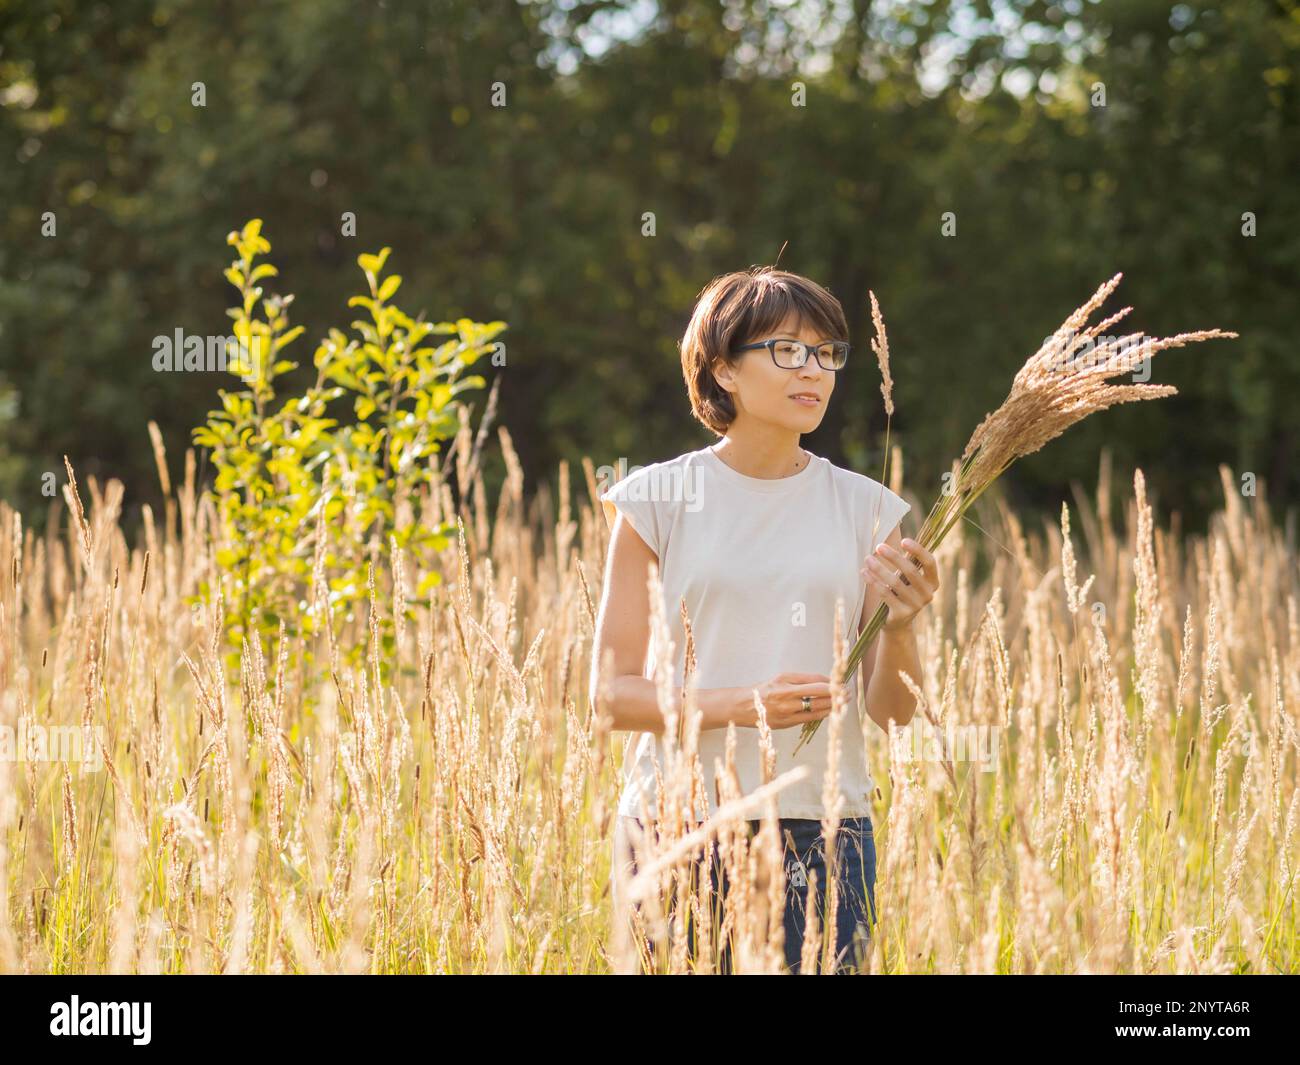 Woman is picking dried grass on autumn field. Florist at work. Using dried plants as decorative bouquet for home interior. Stock Photo